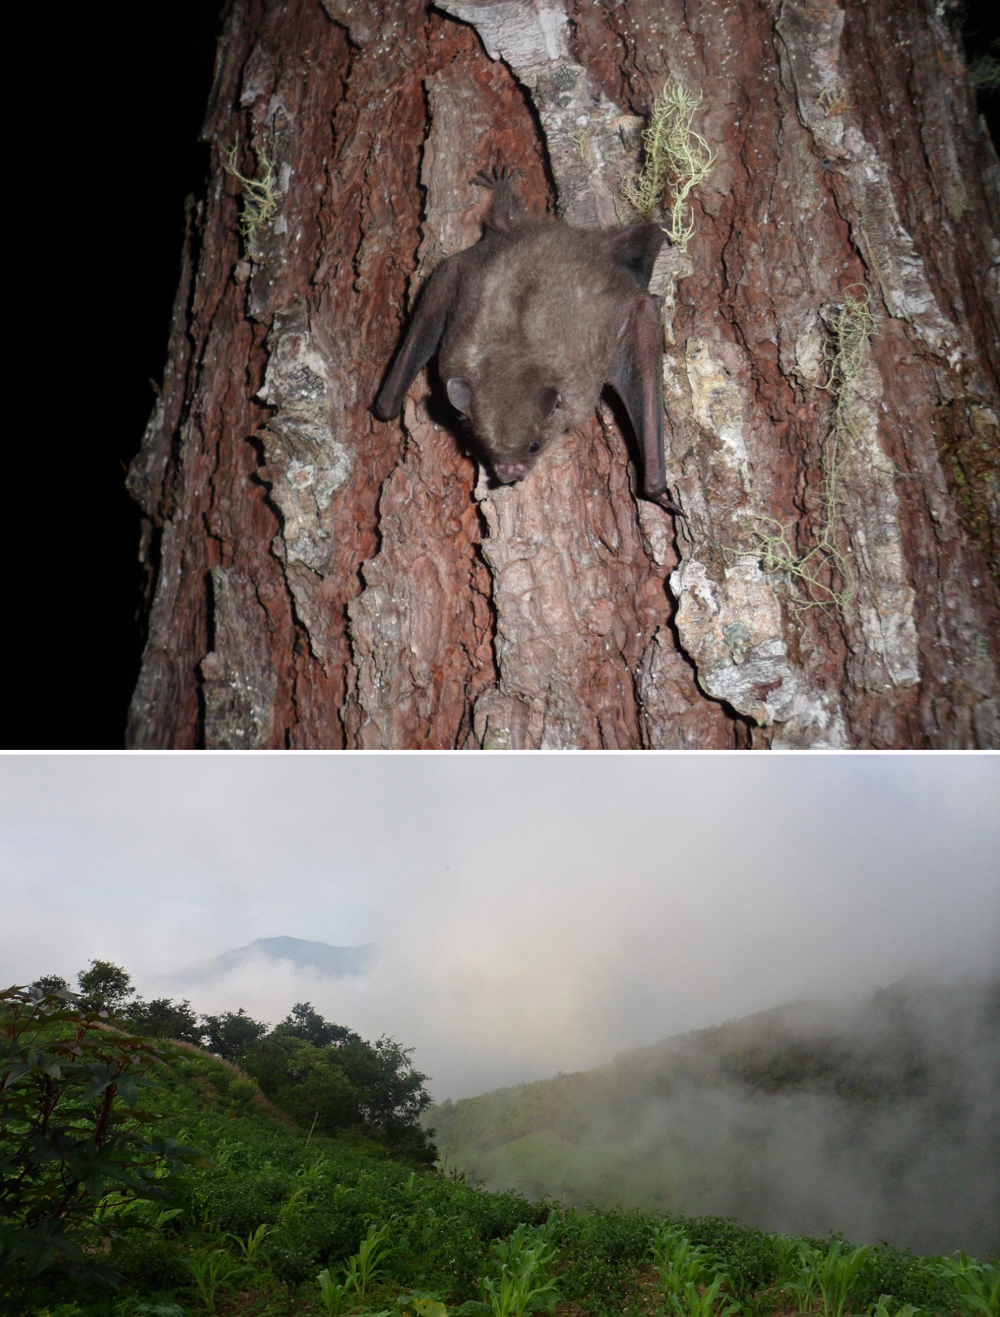 Phyllostomid Bats in Traditional Agriculture and Neotropical Montane Forests